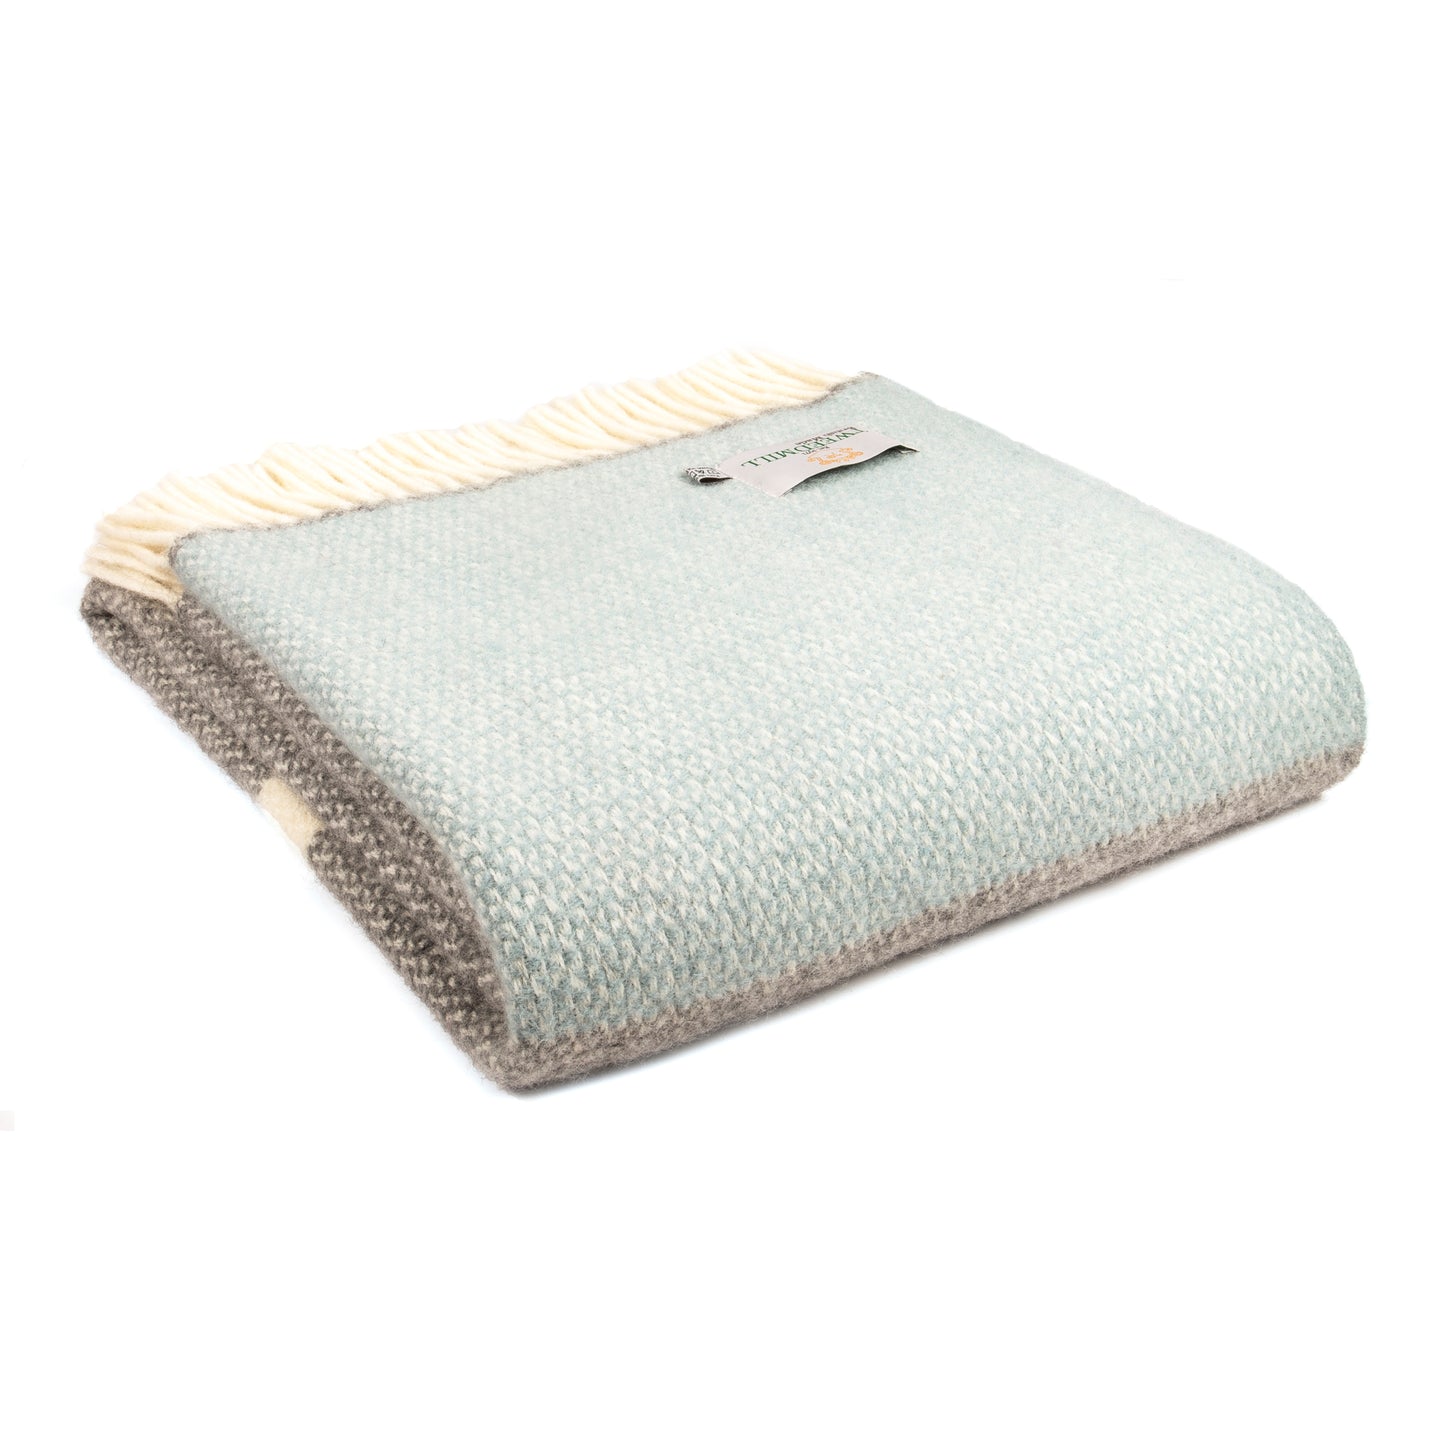 Grey with Duck Egg Blue Panel Illusion Welsh Blanket by Tweedmill